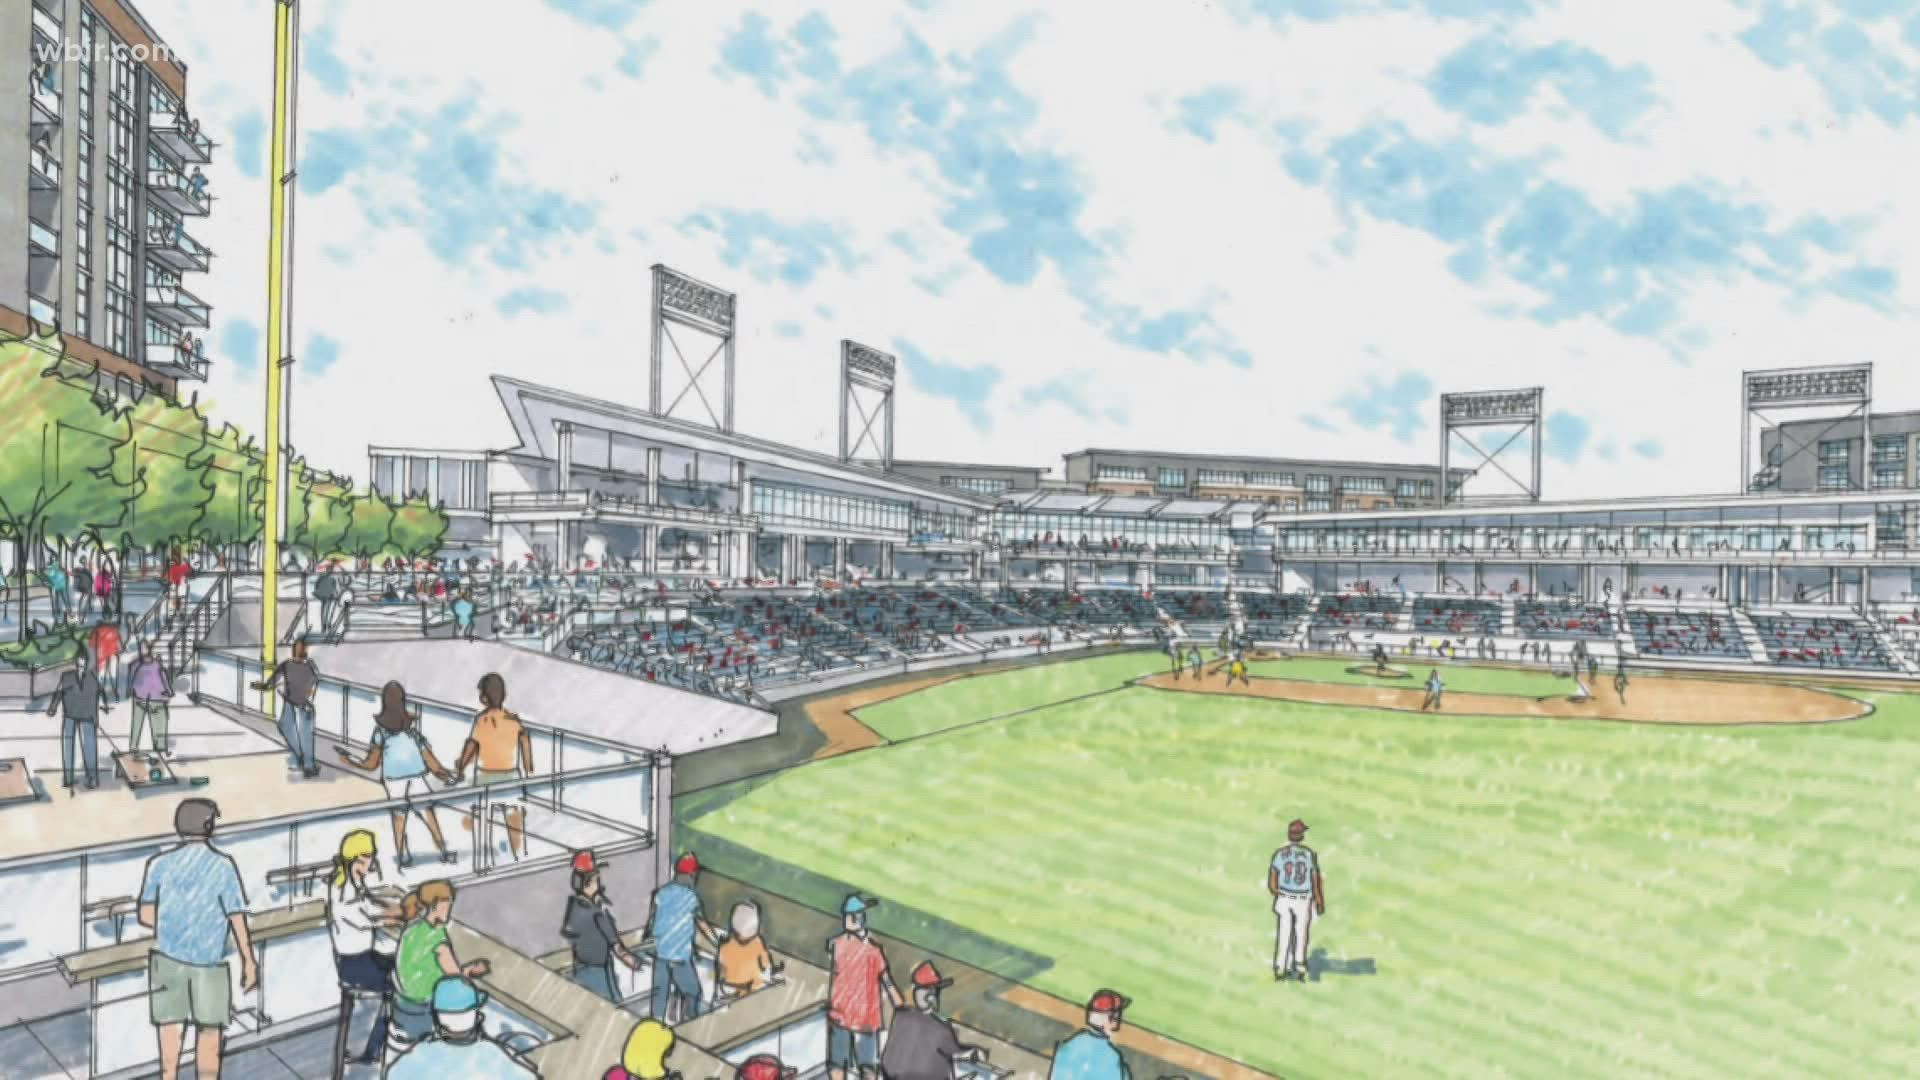 New plans ask taxpayers to contribute $74.5 million towards the stadium project.